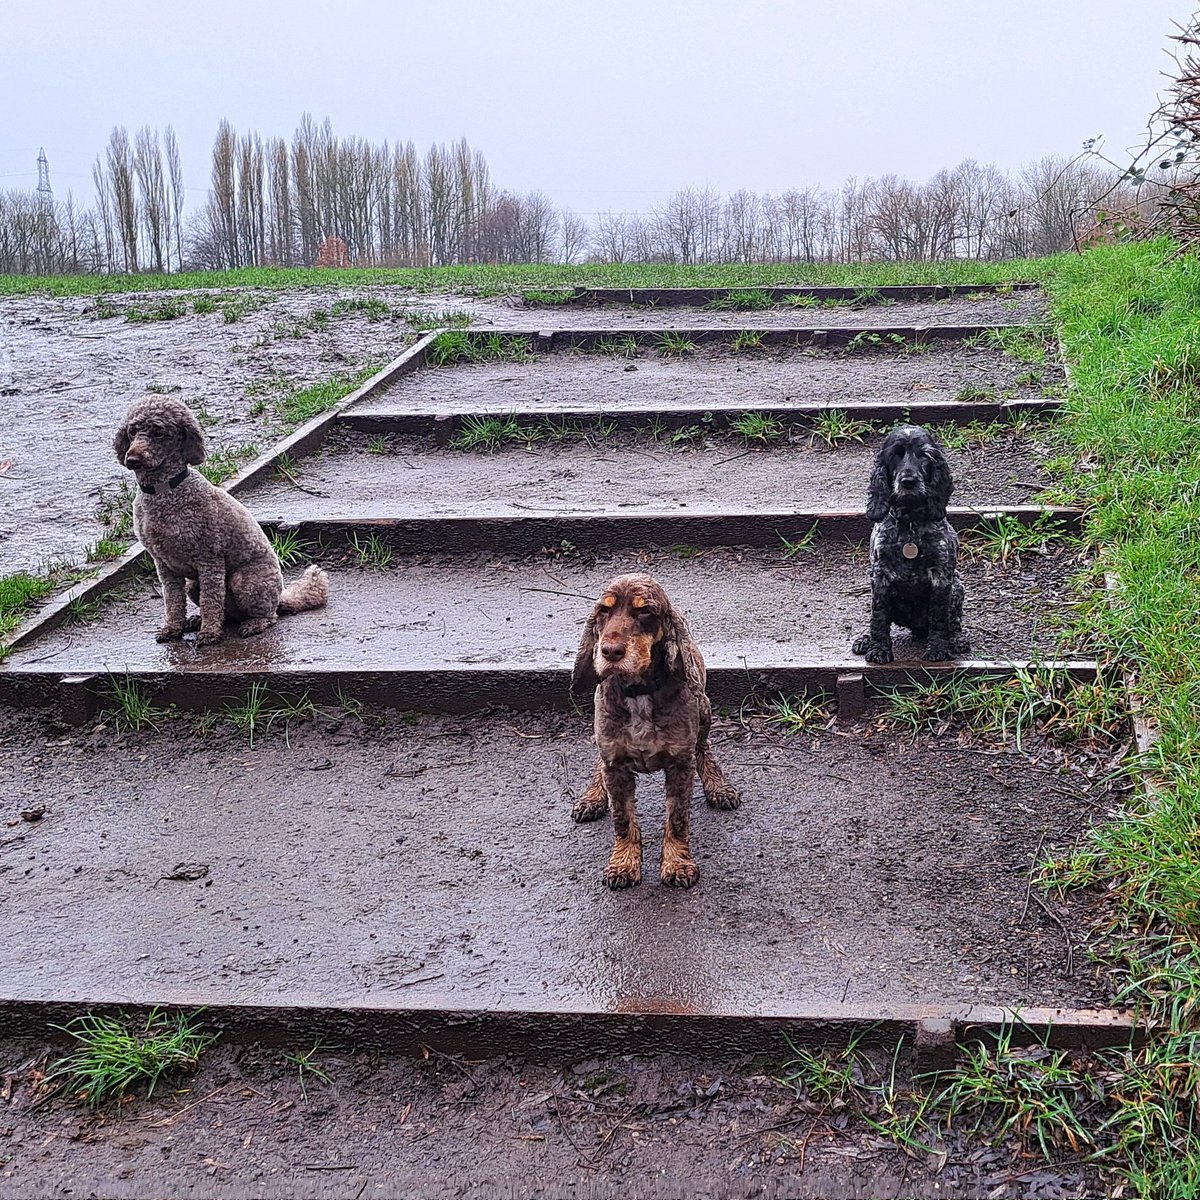 Well, #miserable rainy/sleety day or not Ambassador Abney was not going to miss out on a #playdate with her besie mates, Digital Ambassador pals, #cockerspaniel Aero and #poodle Lennie. 3 very #soggydogs 🙄🐾

#assistancedog #dogswithjobs #volunteer #puppytrainer #cockerspaniel